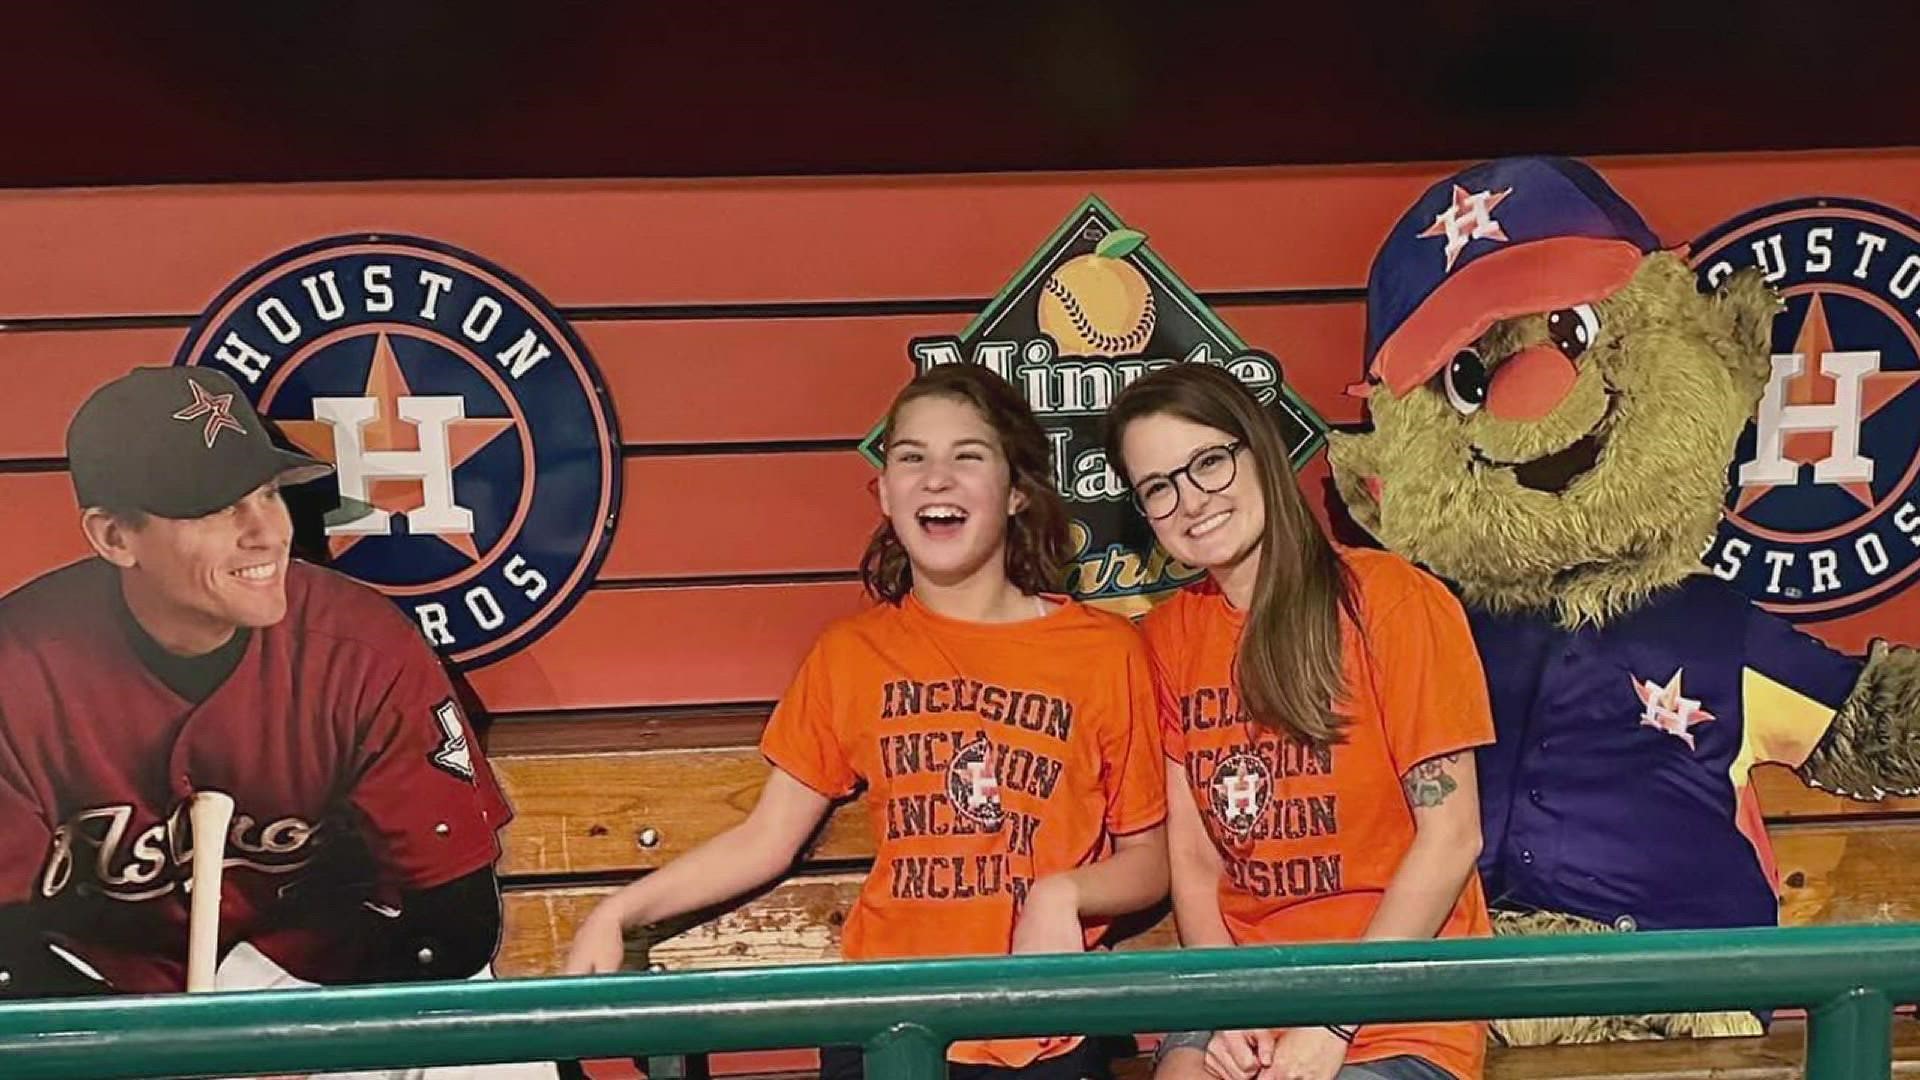 Mary's base steal during the Astros game was a representation of her years of hard work in physical therapy.